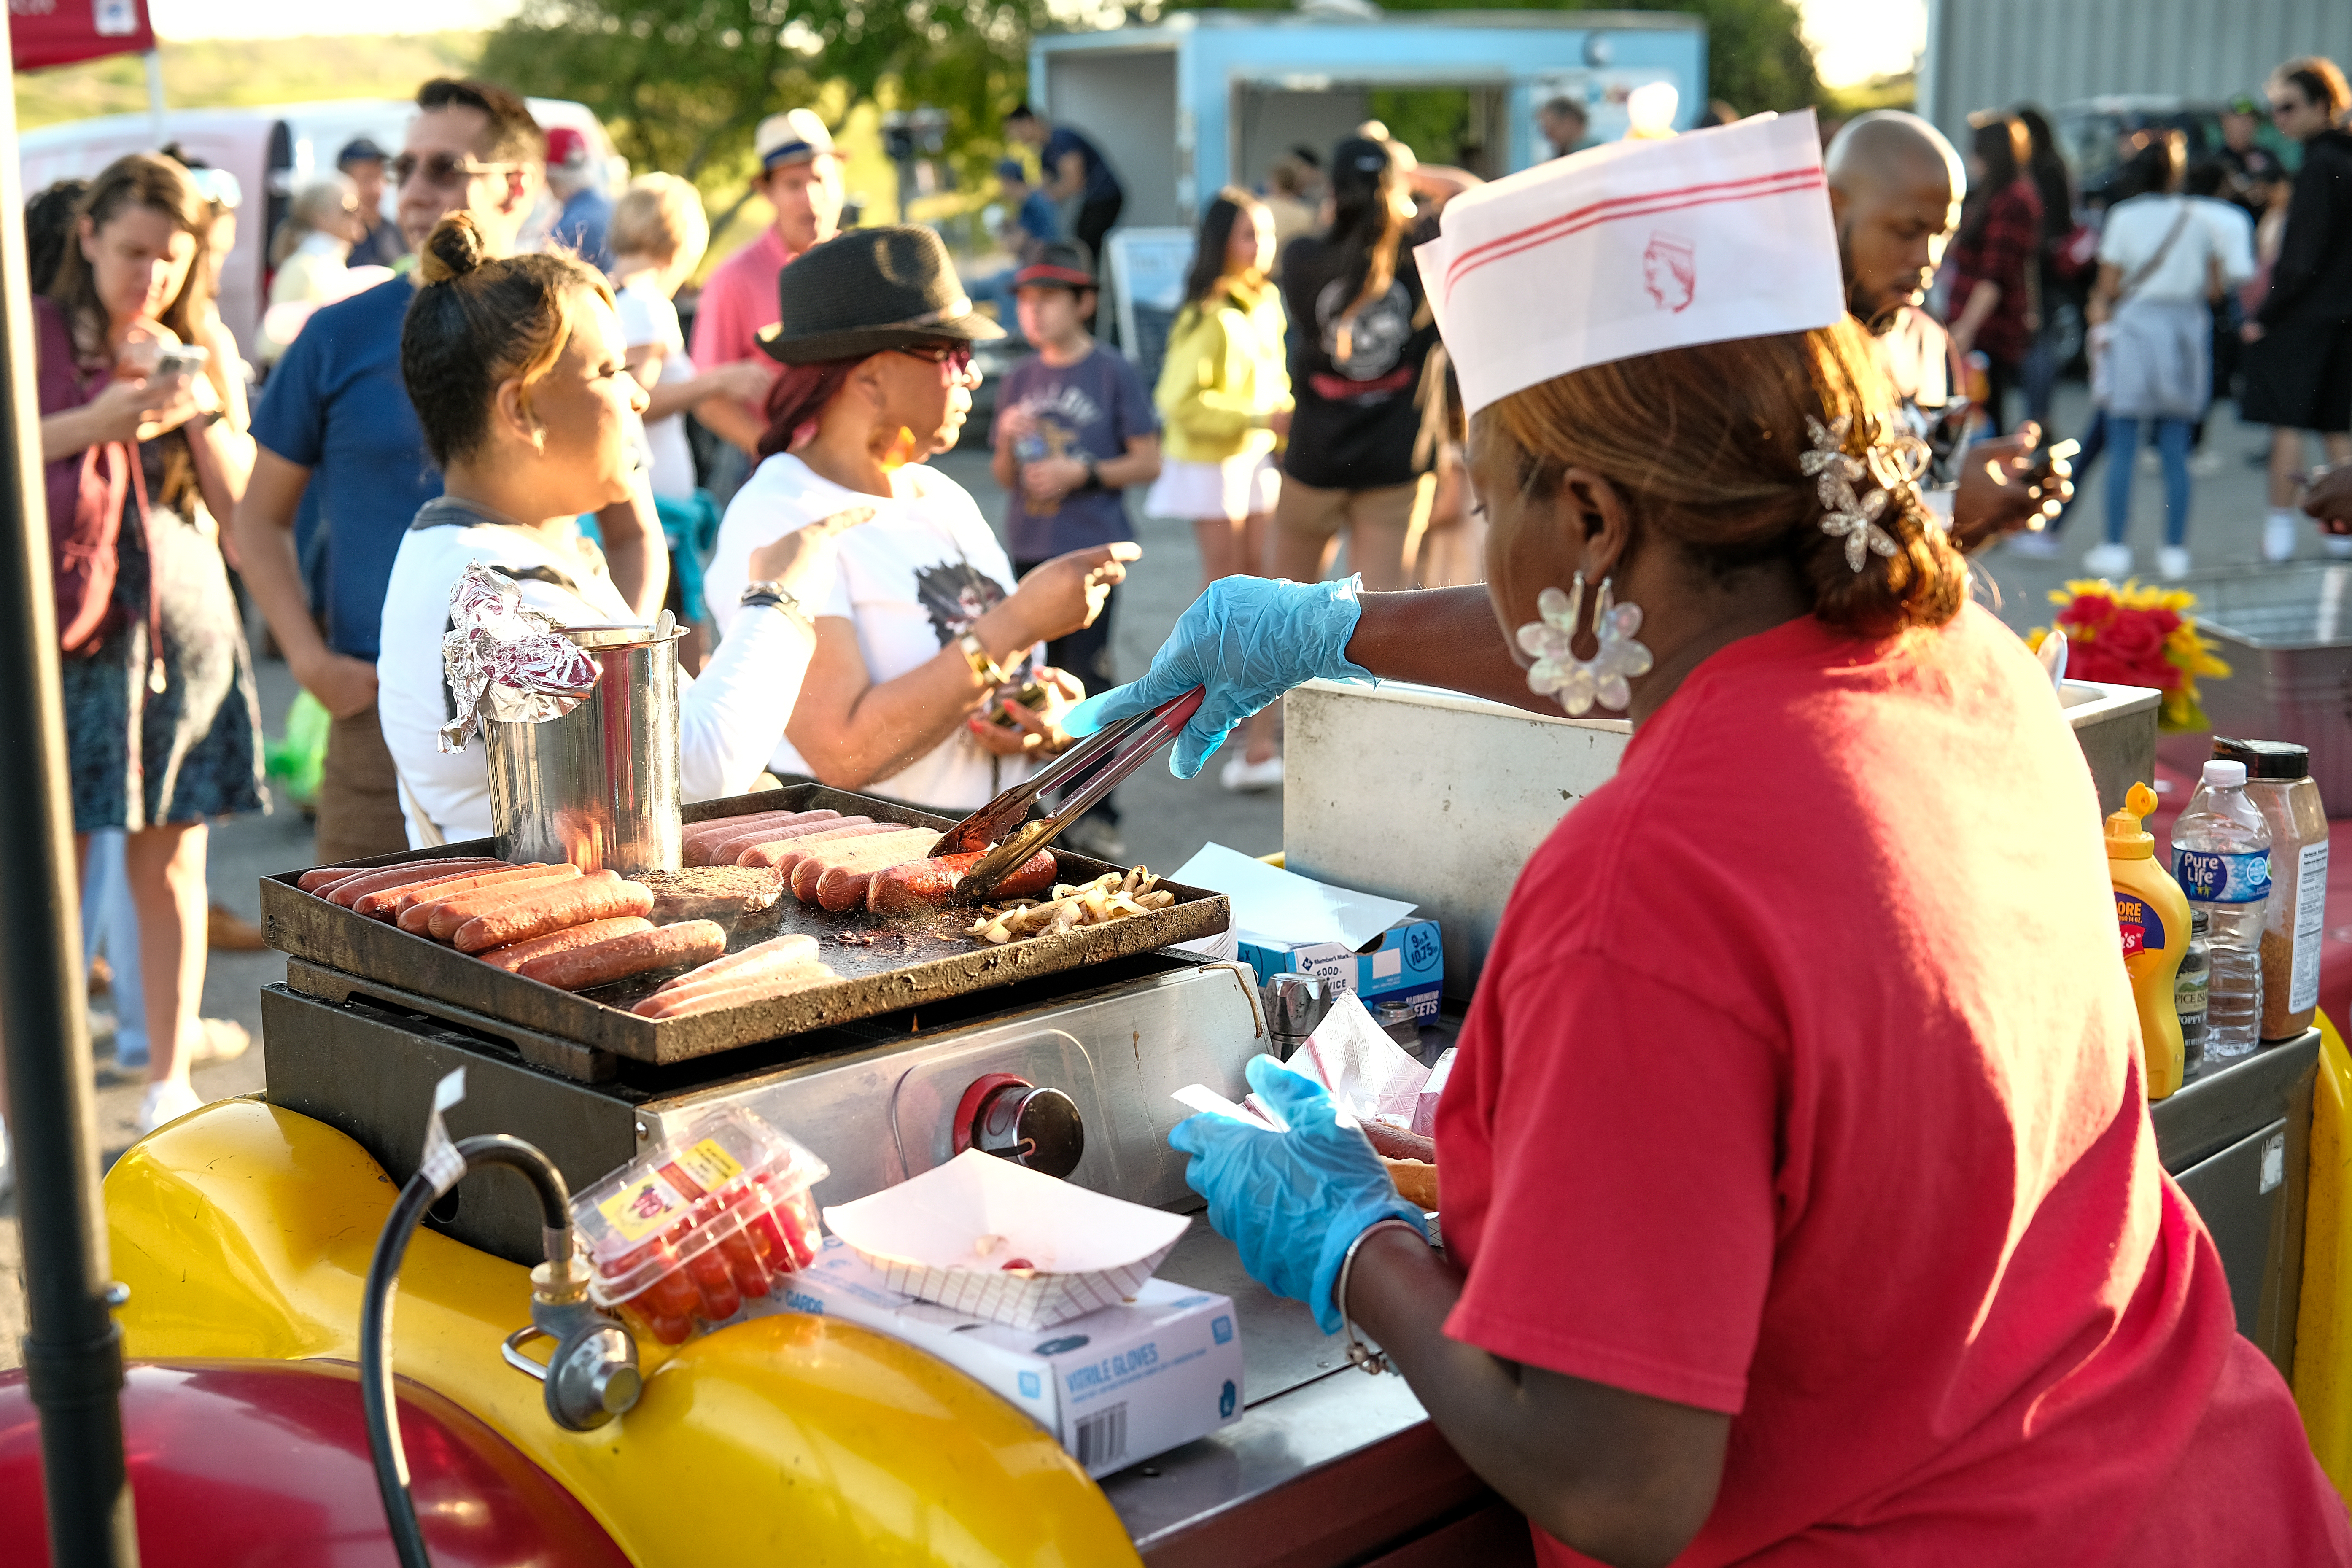 A food vendor, Dogs on Wheels, cooks hotdogs & sausages on a flat top grill. 